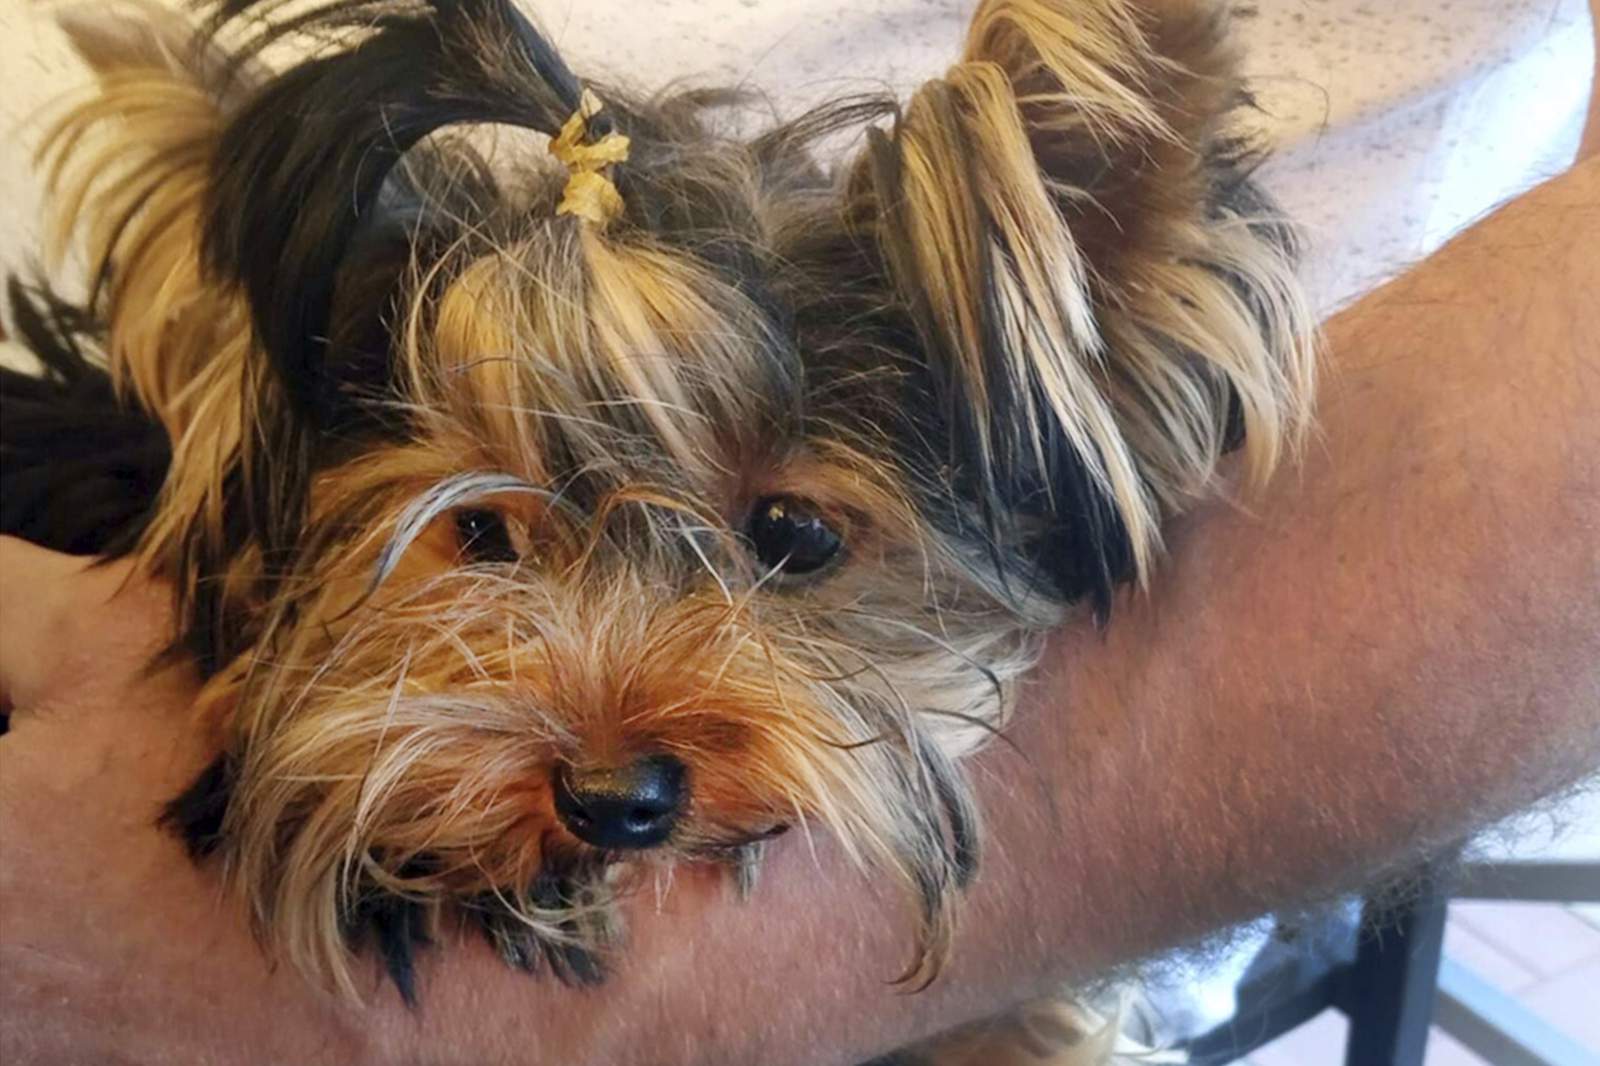 Yorkie’s death at airport facility fuels legal fight